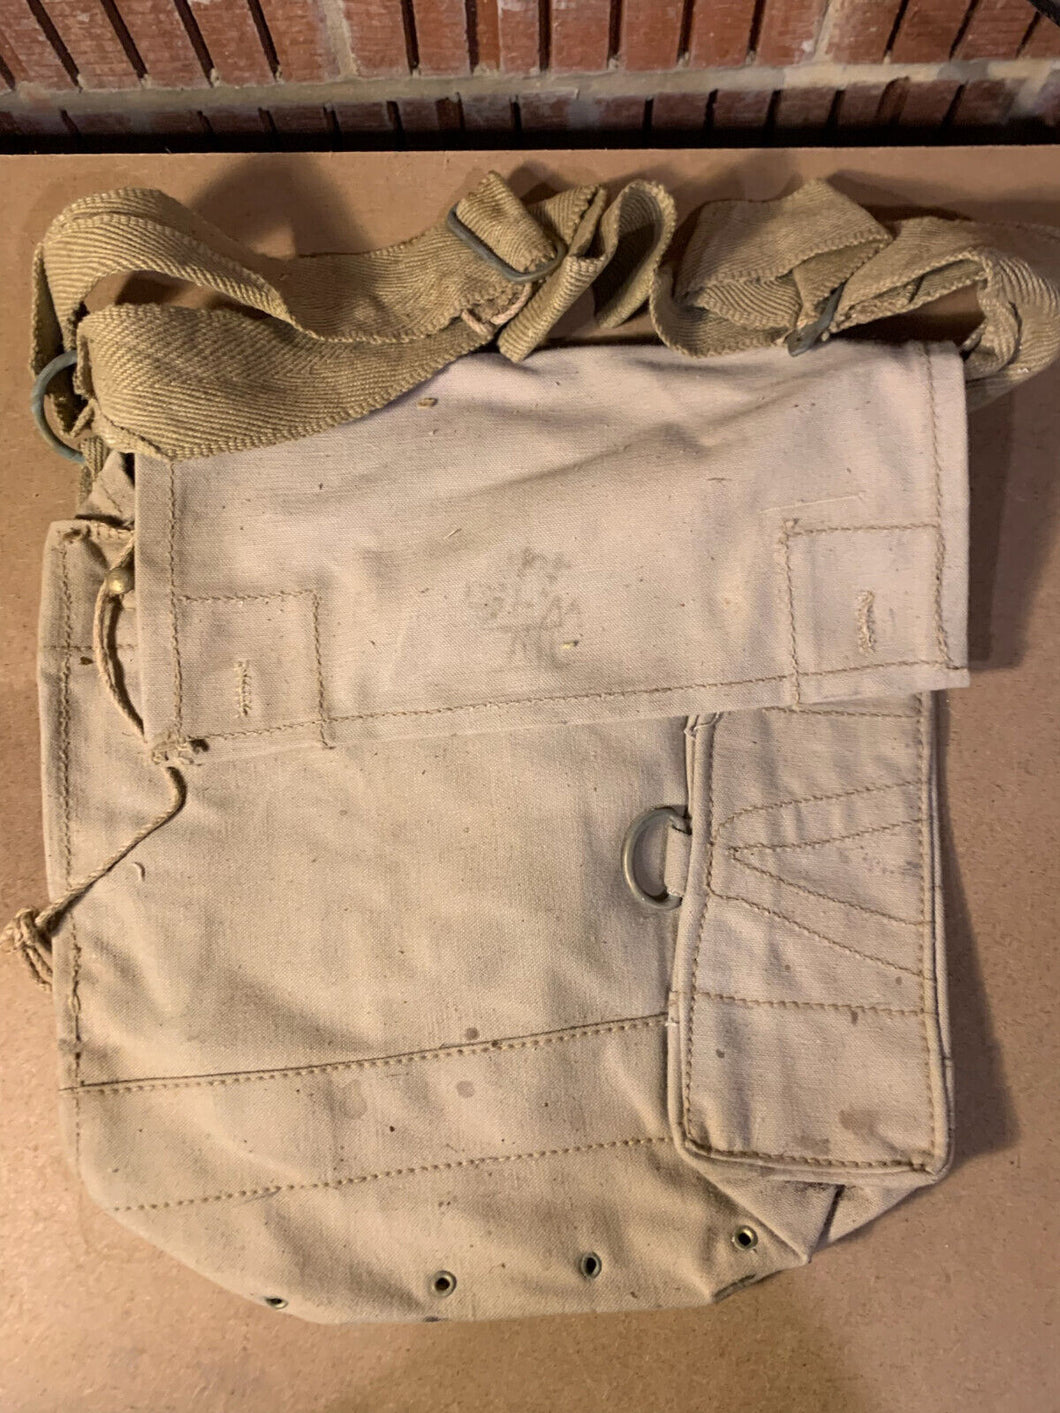 Original WW2 British Army Indian Made Soldiers Gas Mask Bag & Strap - 1944 Dated